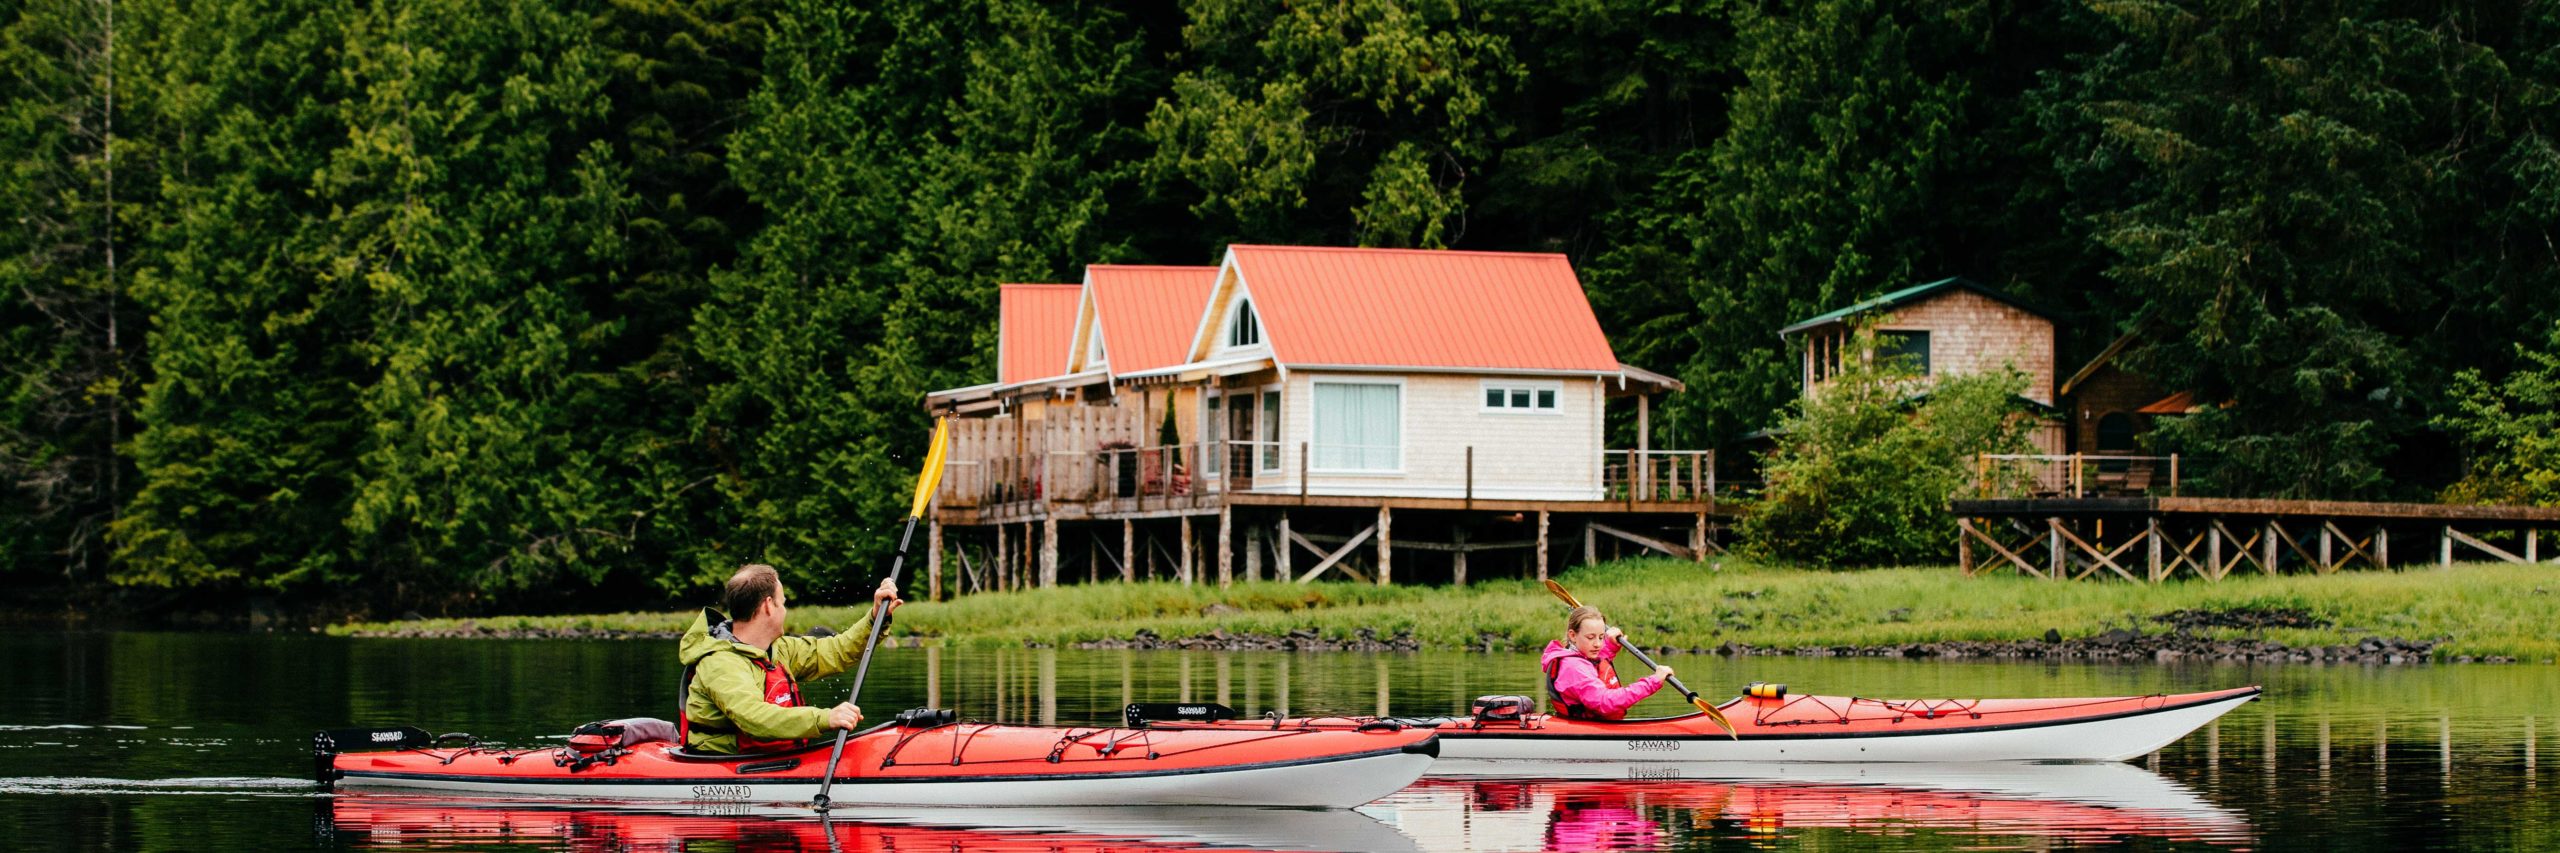 The Finest Lodges in Canada & Alaska